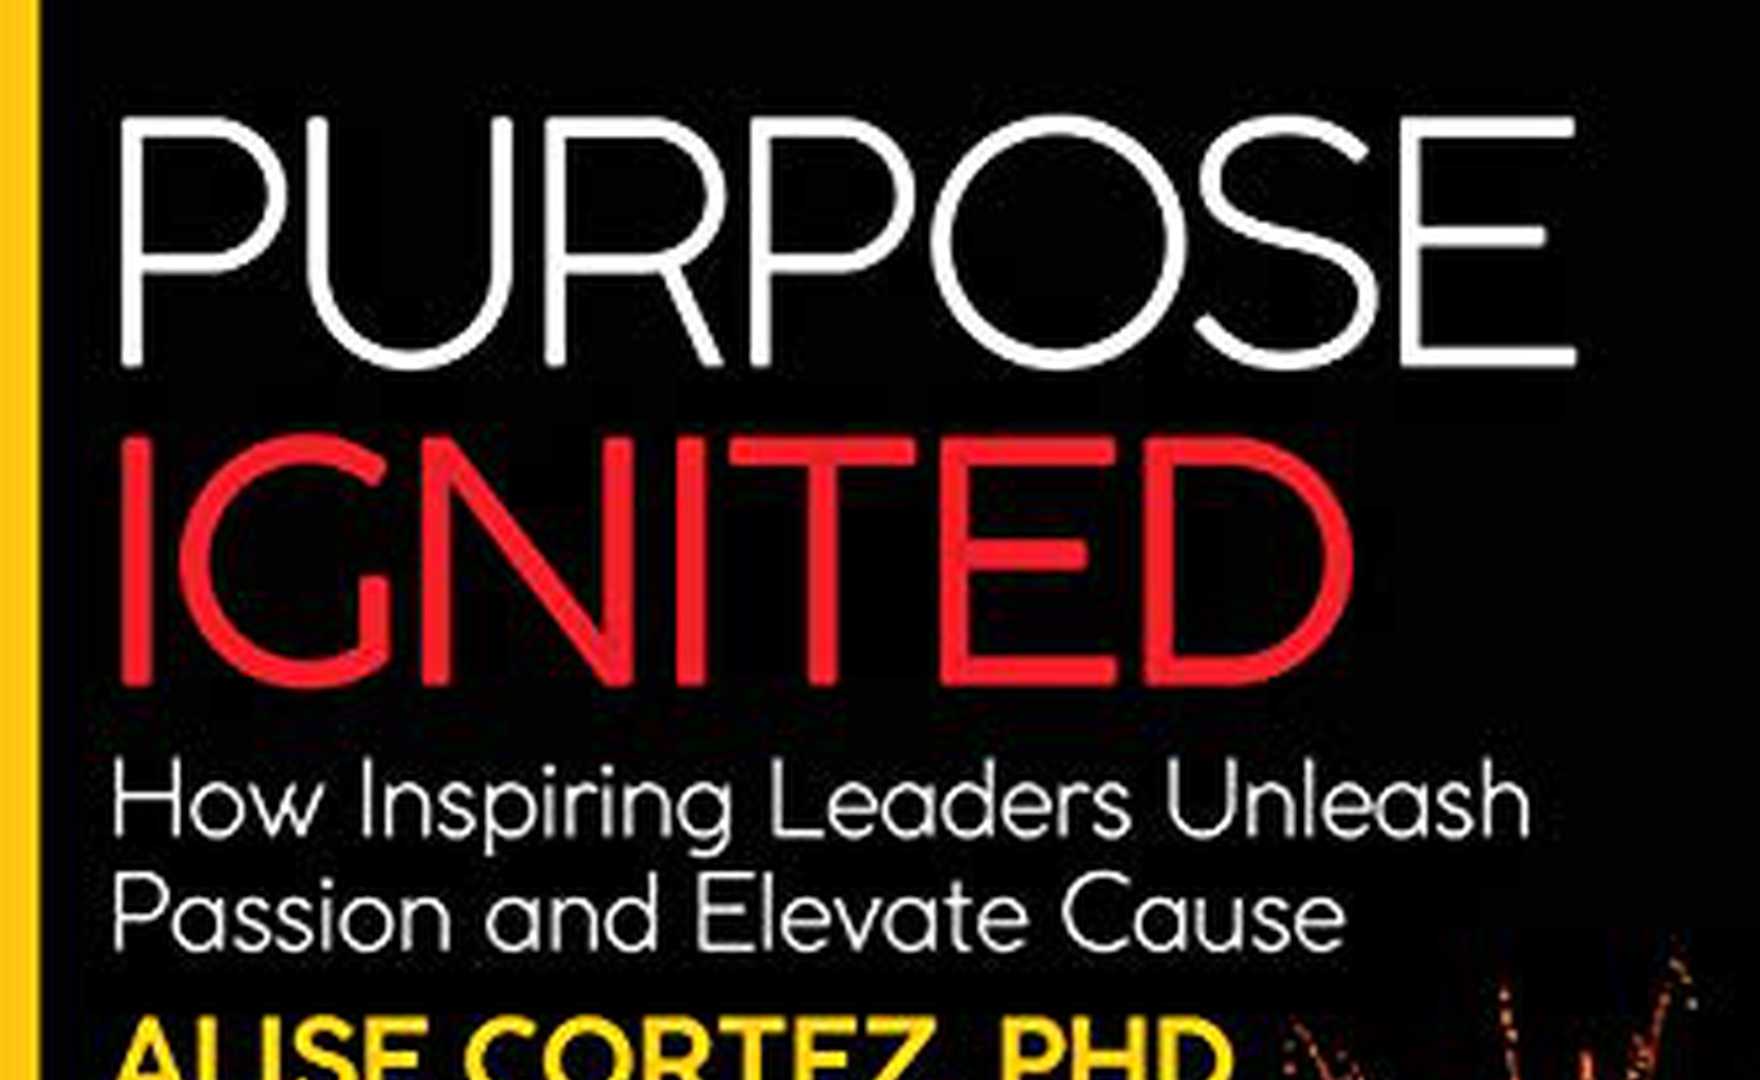 Book review – Purpose Ignited by Alise Cortez